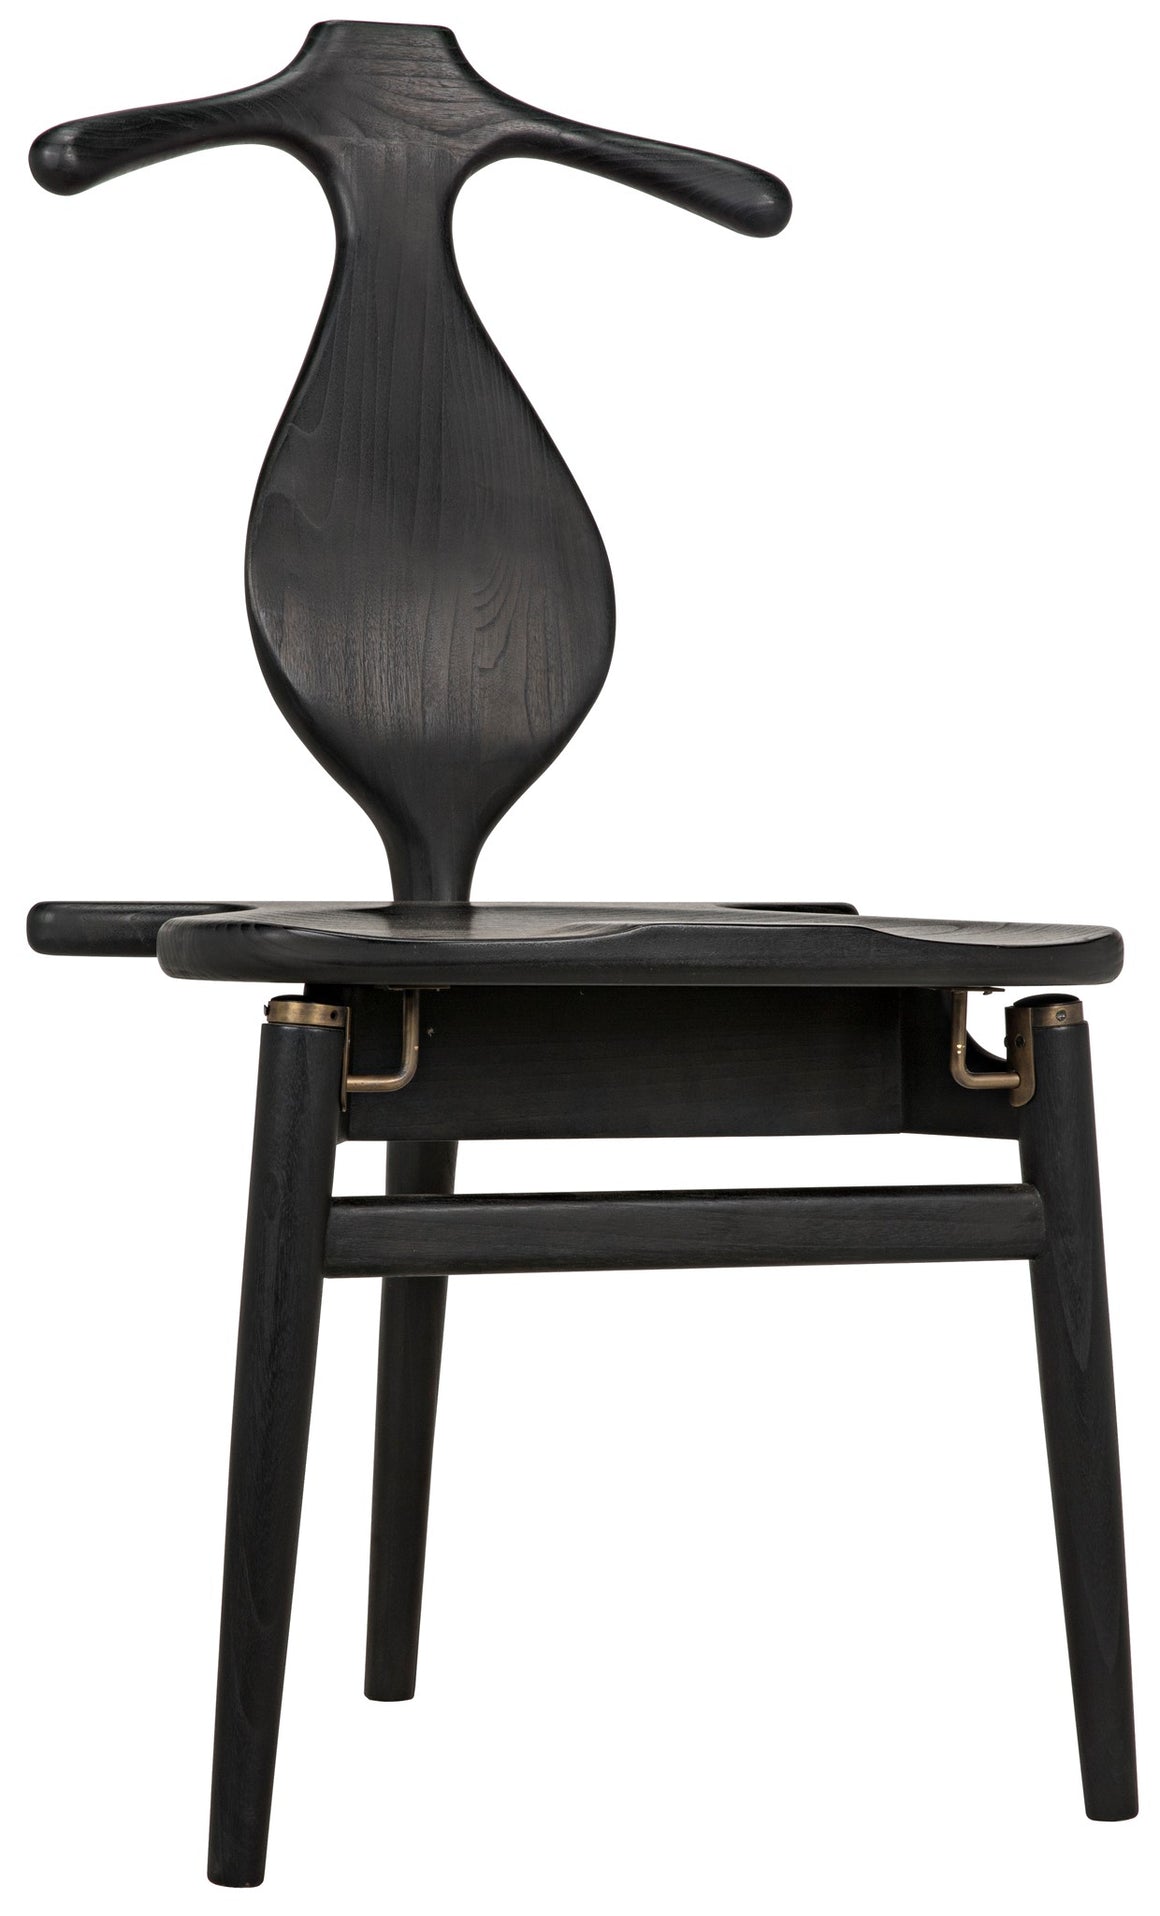 Noir Figaro Chair with Jewelry Box - Charcoal Black